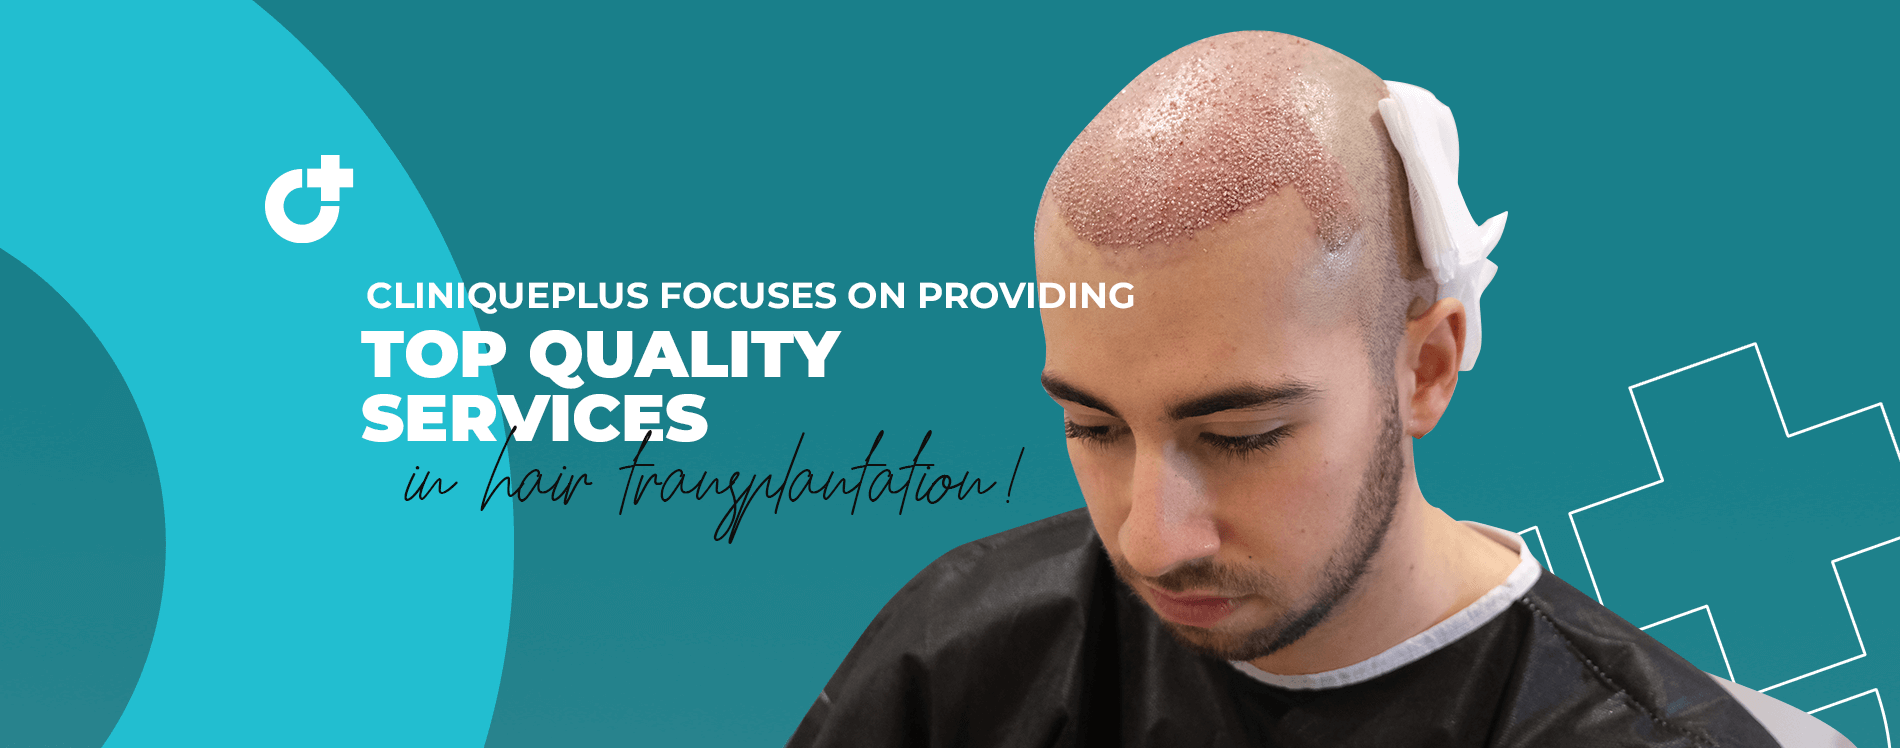 CLINIQUEPLUS focuses on providing top quality services in hair transplantation!